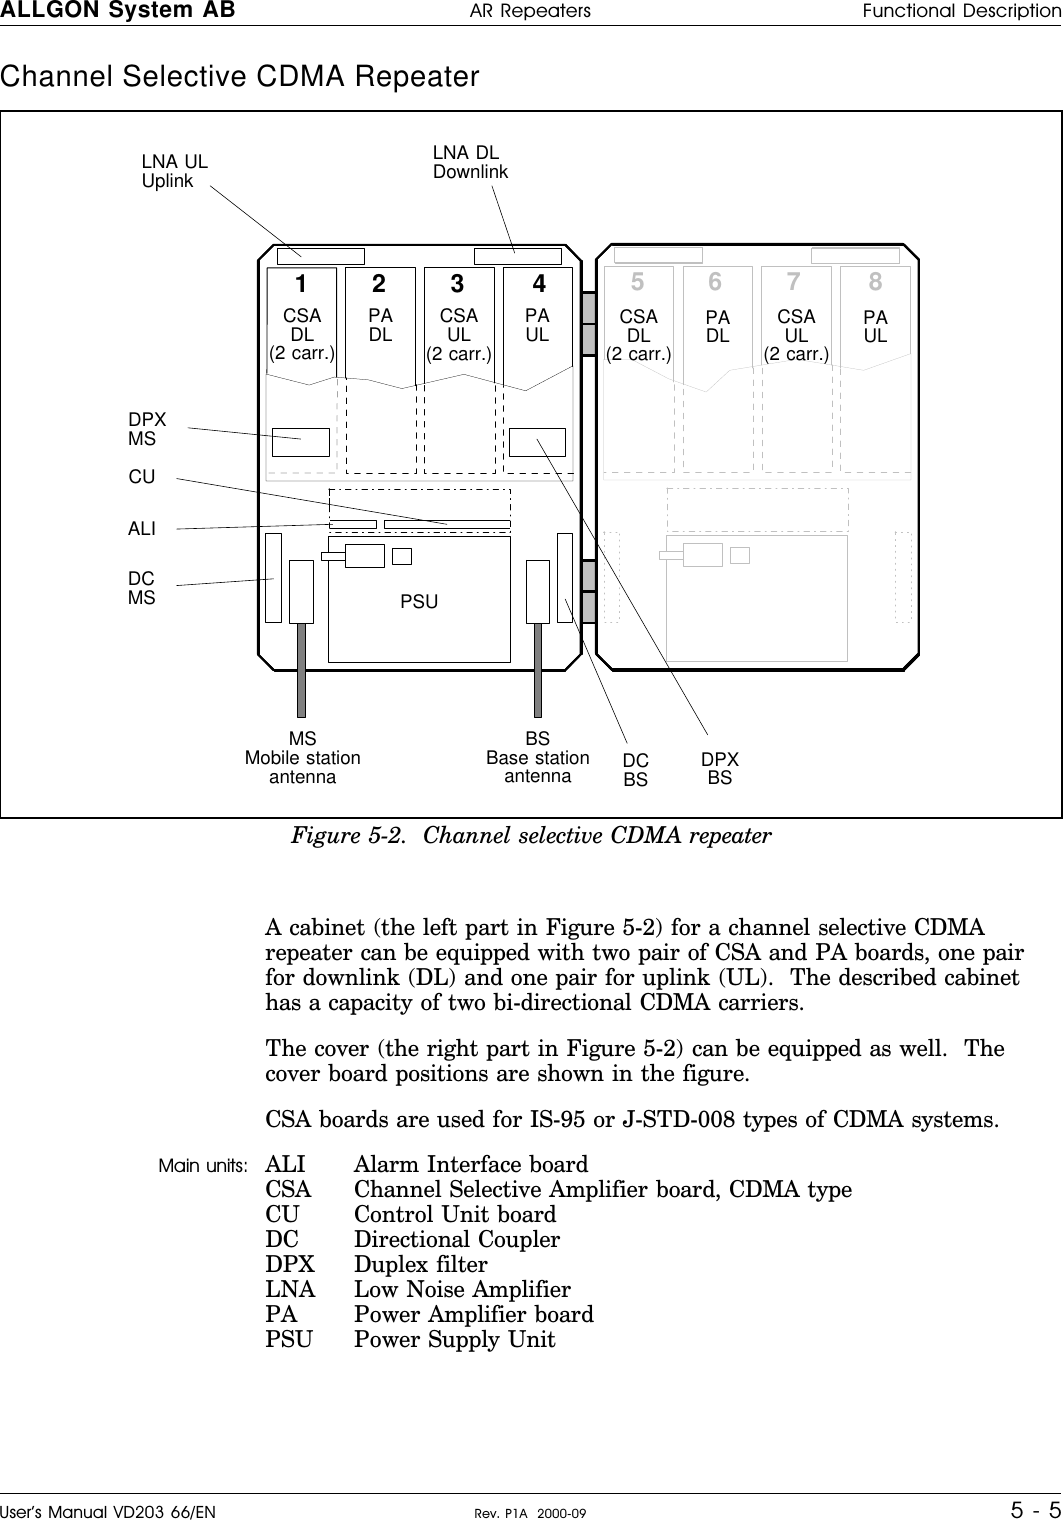 Channel Selective CDMA Repeater         A cabinet (the left part in Figure 5-2) for a channel selective CDMArepeater can be equipped with two pair of CSA and PA boards, one pairfor downlink (DL) and one pair for uplink (UL).  The described cabinethas a capacity of two bi-directional CDMA carriers.The cover (the right part in Figure 5-2) can be equipped as well.  Thecover board positions are shown in the figure.CSA boards are used for IS-95 or J-STD-008 types of CDMA systems.Main units: ALI Alarm Interface boardCSA Channel Selective Amplifier board, CDMA typeCU Control Unit boardDC Directional CouplerDPX Duplex filterLNA Low Noise AmplifierPA Power Amplifier boardPSU Power Supply Unit123 4 567 8CSADL(2 carr.)MSMobile stationantennaBSBase stationantennaPADL CSAUL(2 carr.)PAULLNA DLDownlinkLNA ULUplinkDPXMSDCMSCUALIDCBS DPXBSPSUCSADL(2 carr.)PADL CSAUL(2 carr.)PAULFigure 5-2.  Channel selective CDMA repeaterALLGON System AB AR Repeaters Functional DescriptionUser’s Manual VD203 66/EN Rev. P1A  2000-09 5 - 5